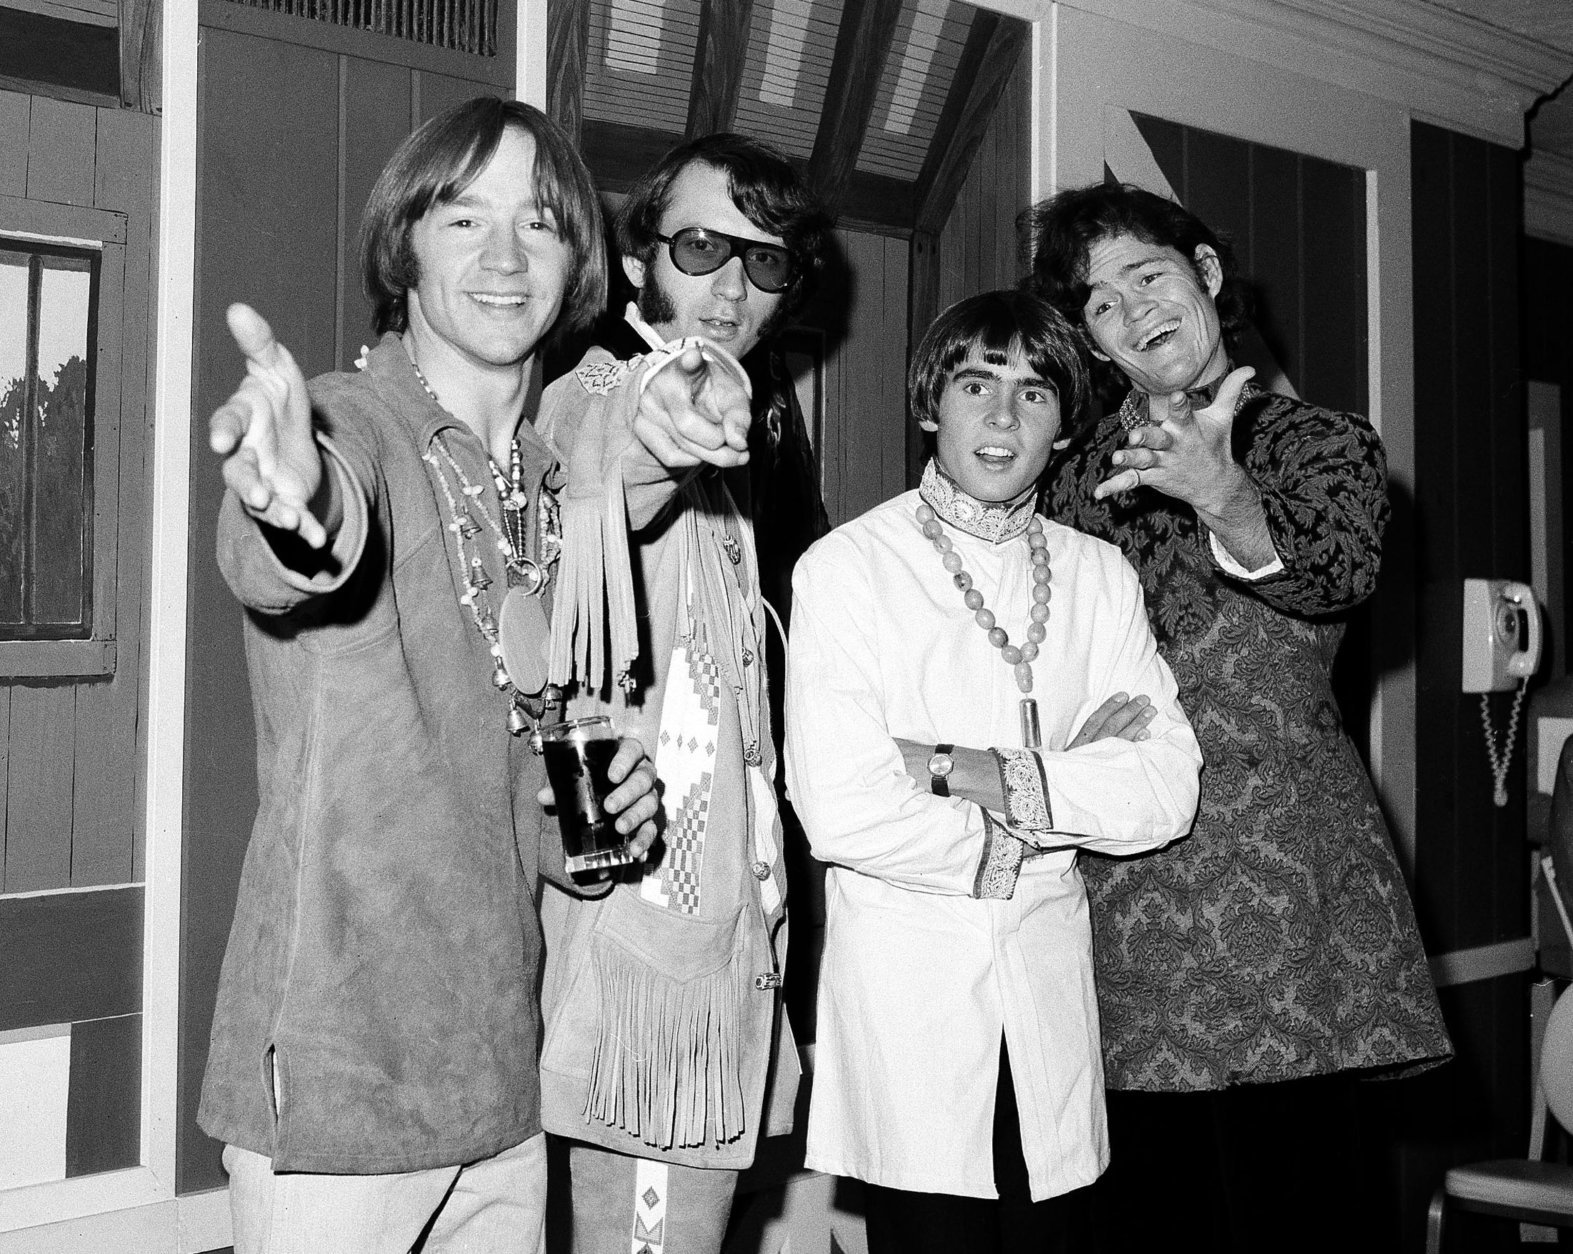 FILE - This July 6, 1967 file photo shows the musical group, The Monkees, from left,  Peter Tork, Mike Nesmith, David Jones, and Micky Dolenz at a news conference at the Warwick Hotel in New York.The Monkees will perform its first live shows since its star Davy Jones died in February. Michael Nesmith, Micky Dolenz, and Peter Tork announced Wednesday, Aug. 8, 2012, that the group will launch a 12-date U.S. tour in November. Jones died of a heart attack on Feb. 29. The group starred in its own NBC television show in 1966 as a made-for-TV band seeking to capitalize on Beatlemania sweeping the world. Jones rocketed to the top of the music charts with The Monkees, captivating audiences with hits including "Daydream Believer" and "I'm a Believer."The tour kicks off Nov. 8 in Escondido, Calif. It wraps on Dec. 2 in New York. It will highlight Jones in the show's multimedia content. (AP Photo/Ray Howard, file)